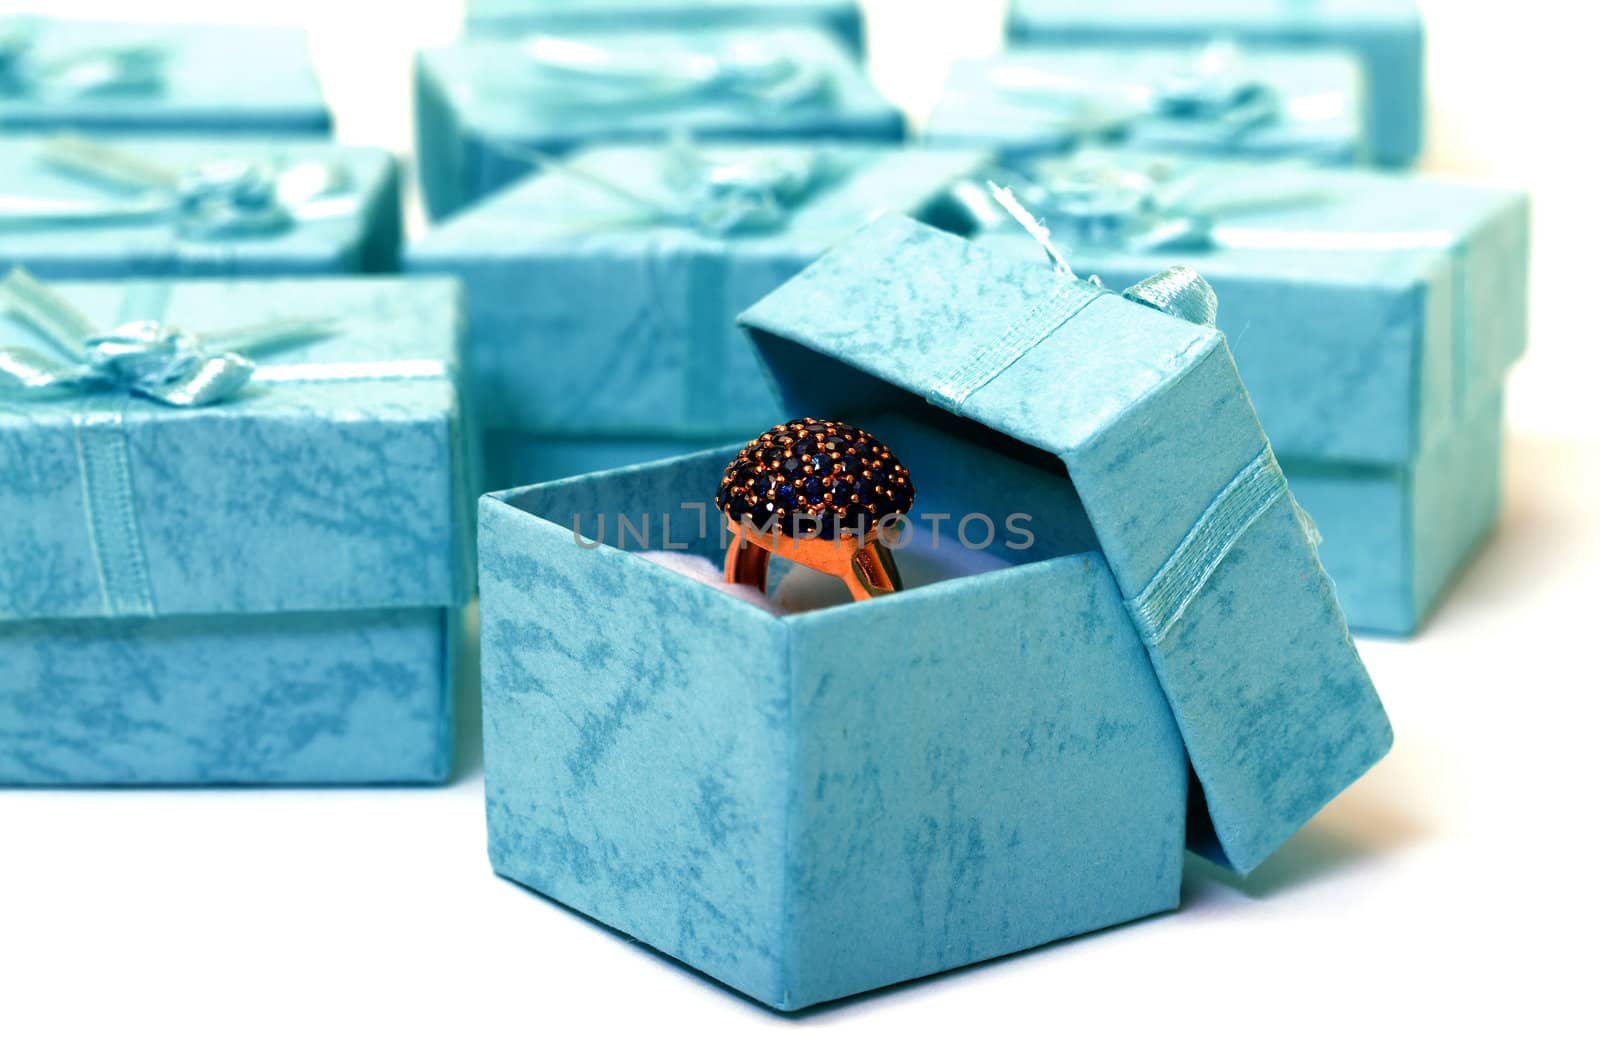 Cyan gift boxes with ring closeup on white background